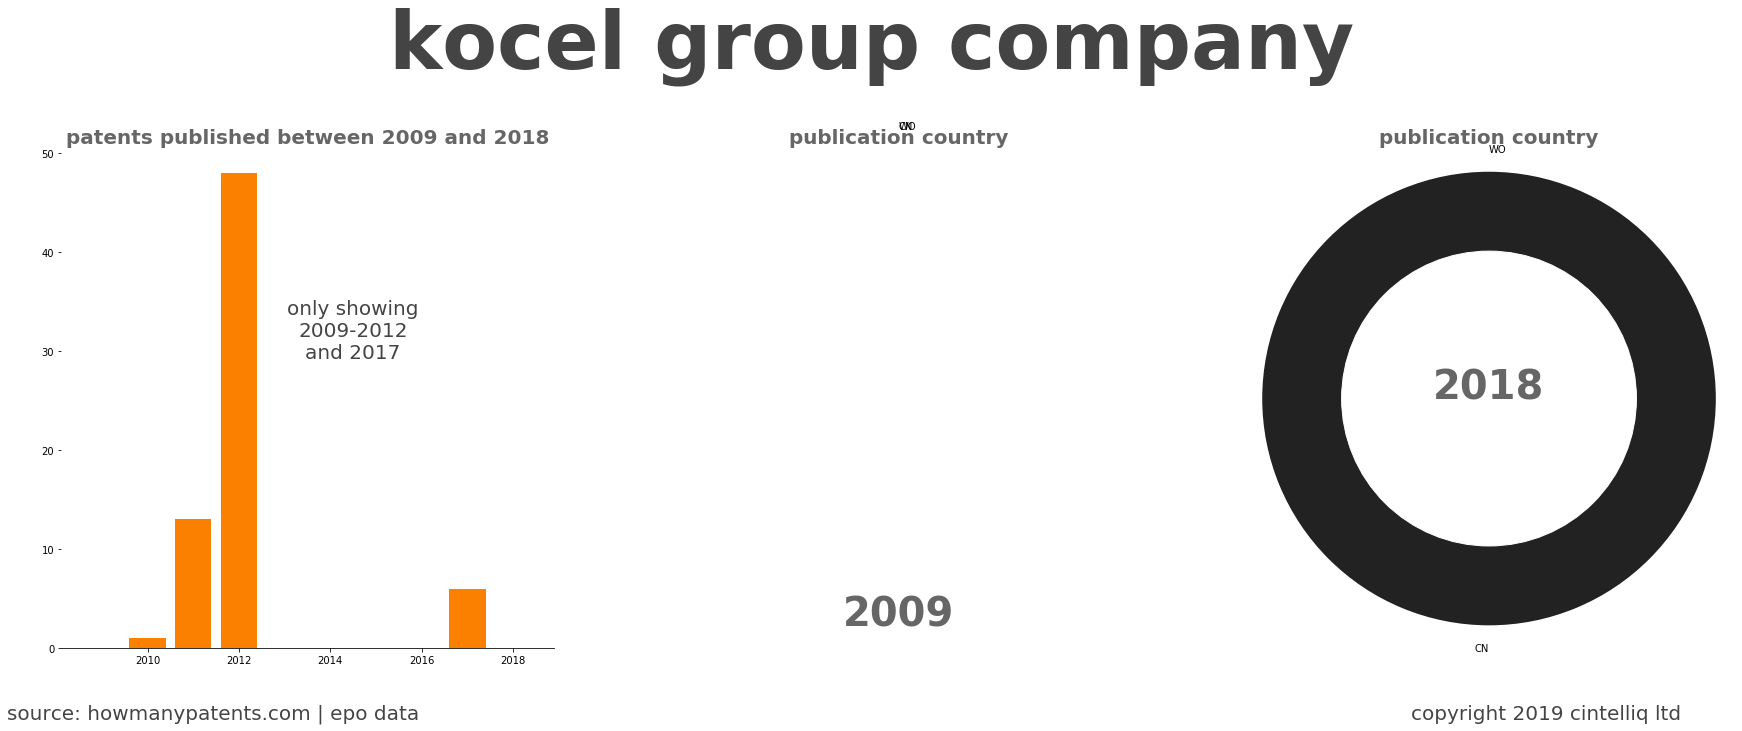 summary of patents for Kocel Group Company